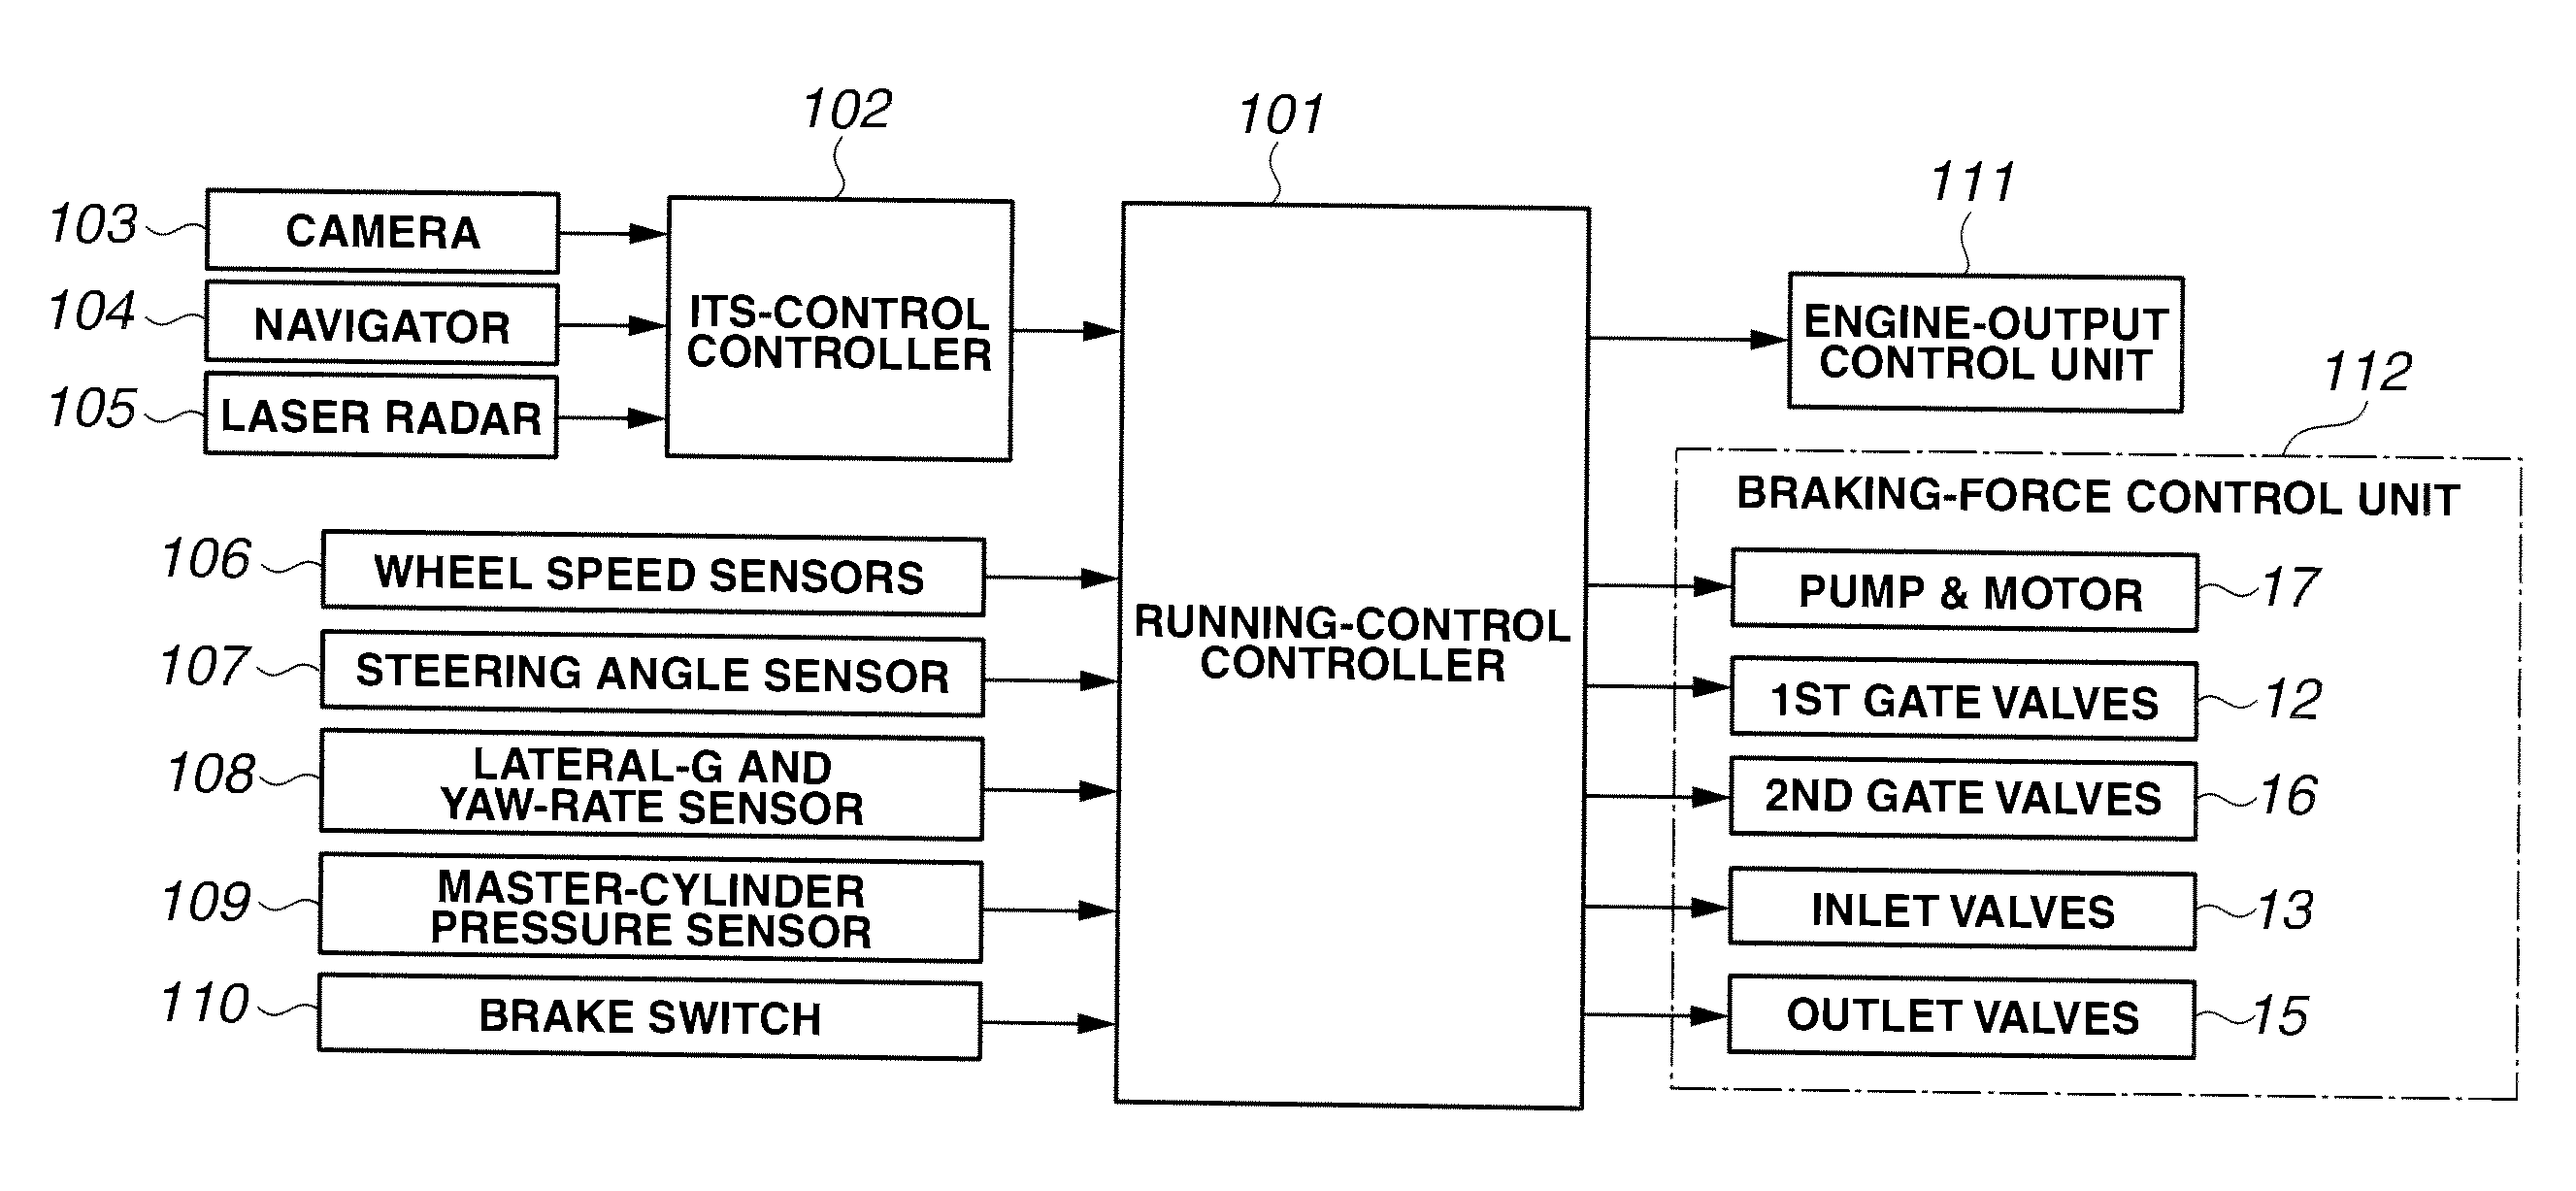 Braking force control device for vehicles